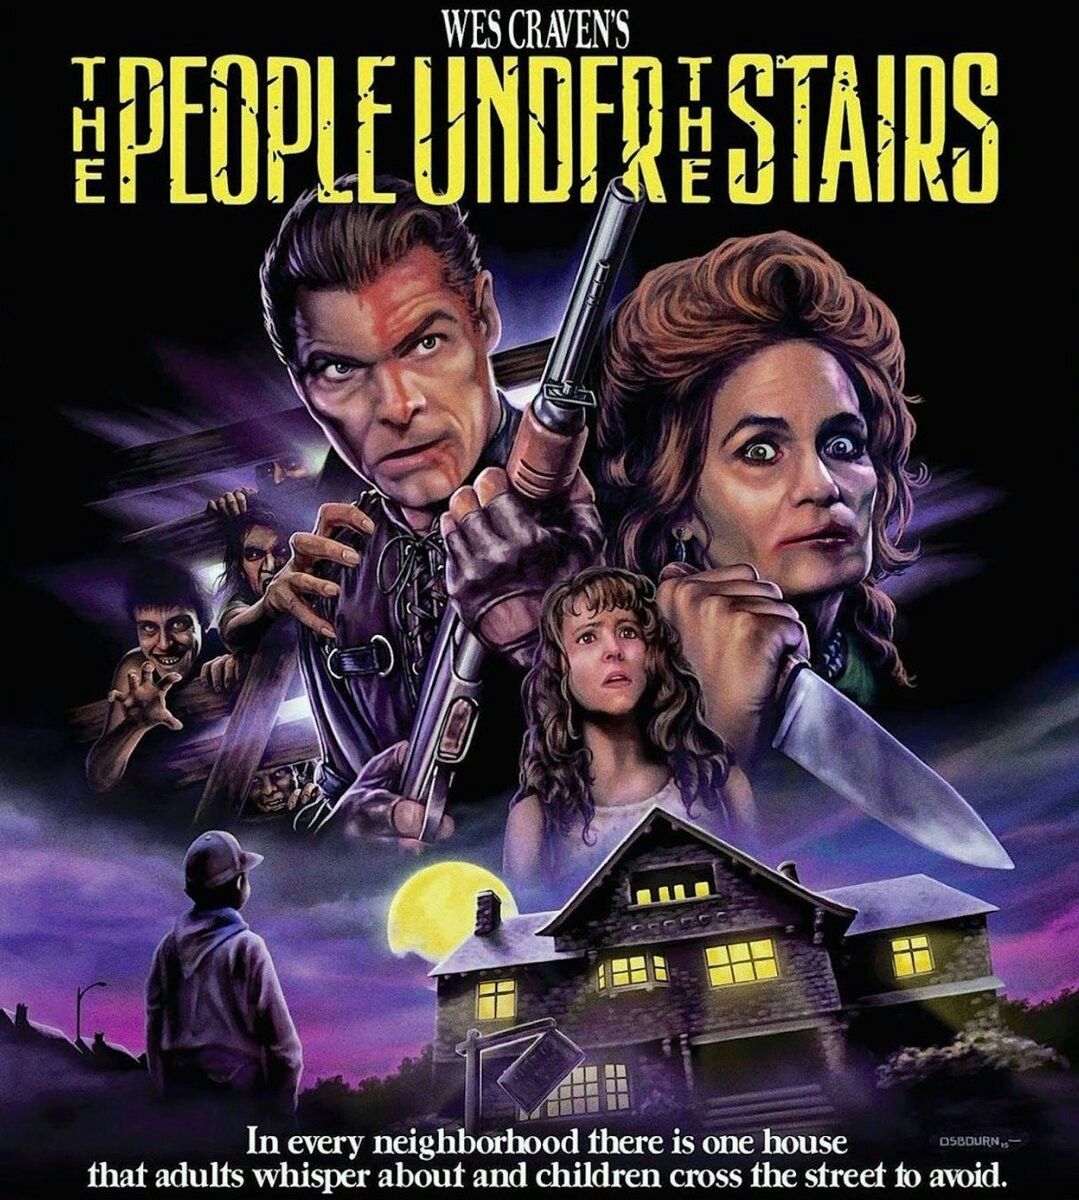 8/30/20 (first viewing) - The People Under the Stairs (1991) Dir. Wes Craven